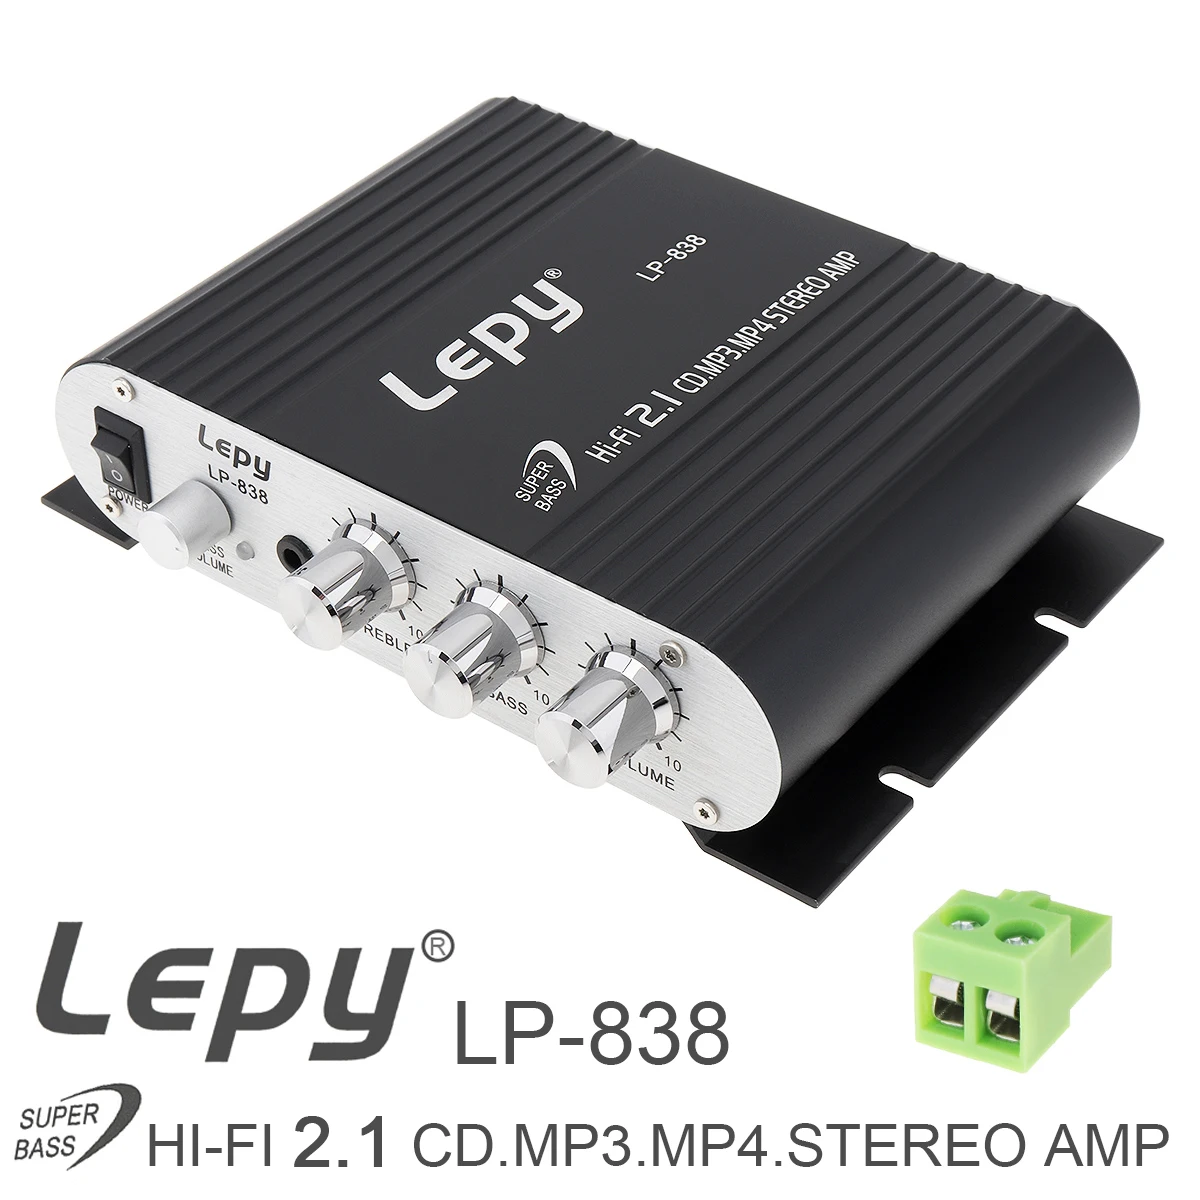 

Lepy LP-838 Car Amplifier 12V Hi-Fi 2.1 Amplifier Booster Radio CD MP3 MP4 Stereo AMP Bass Speakers Player for Car Home